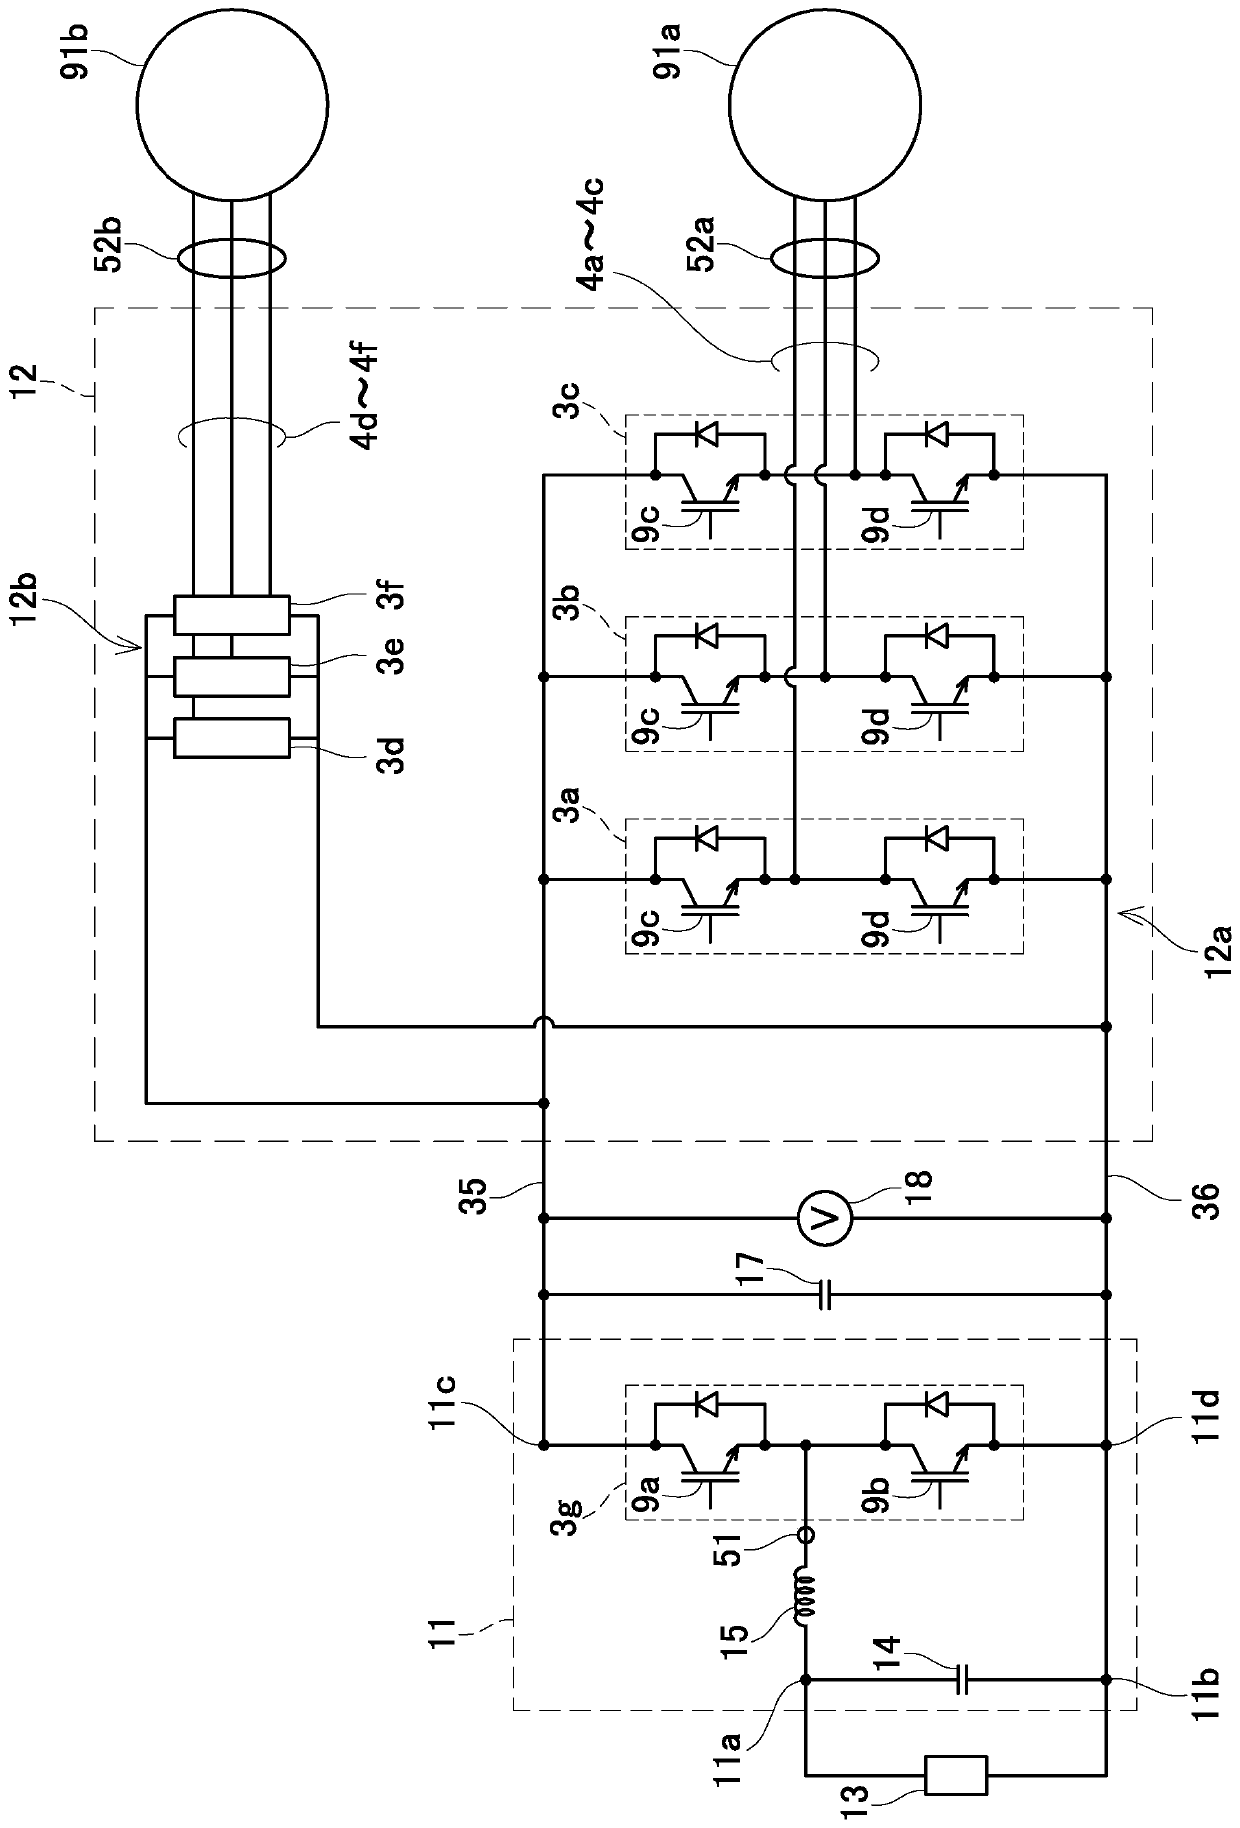 Power converter for electric vehicle